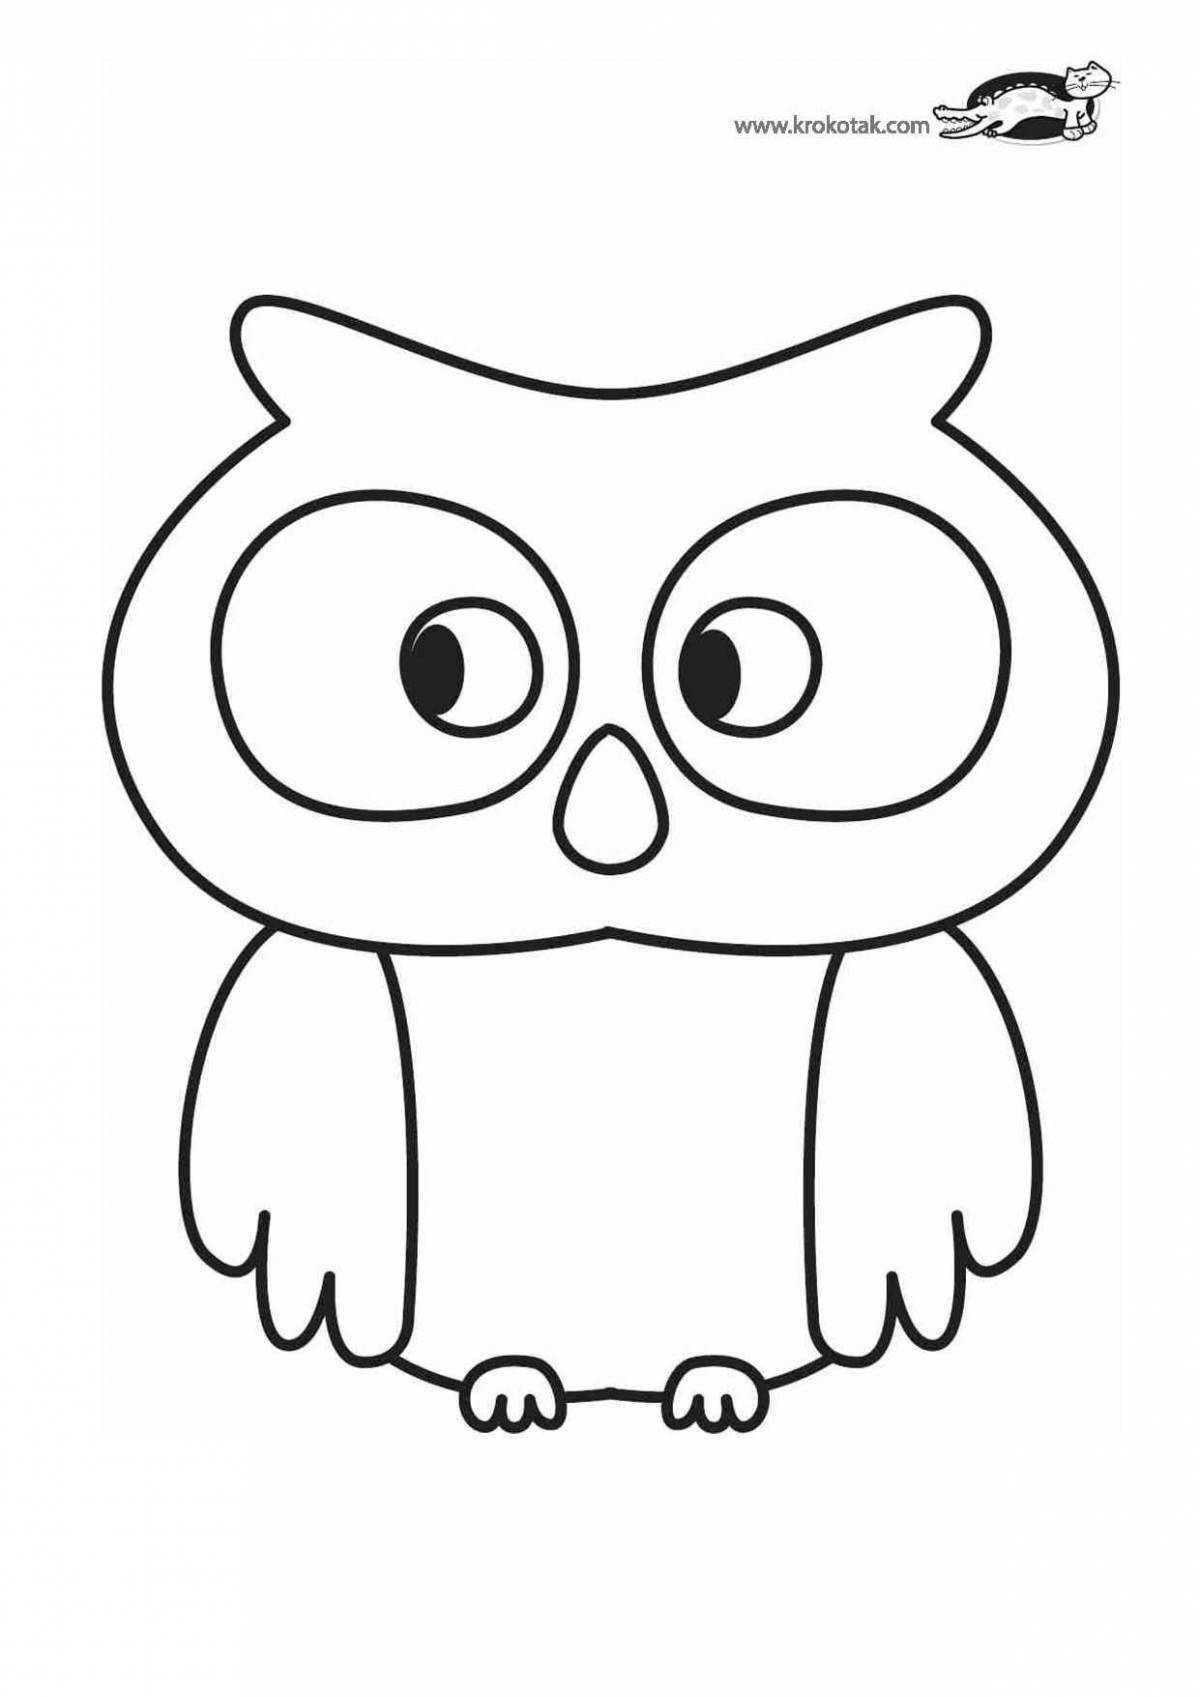 Awesome owl coloring page for kids